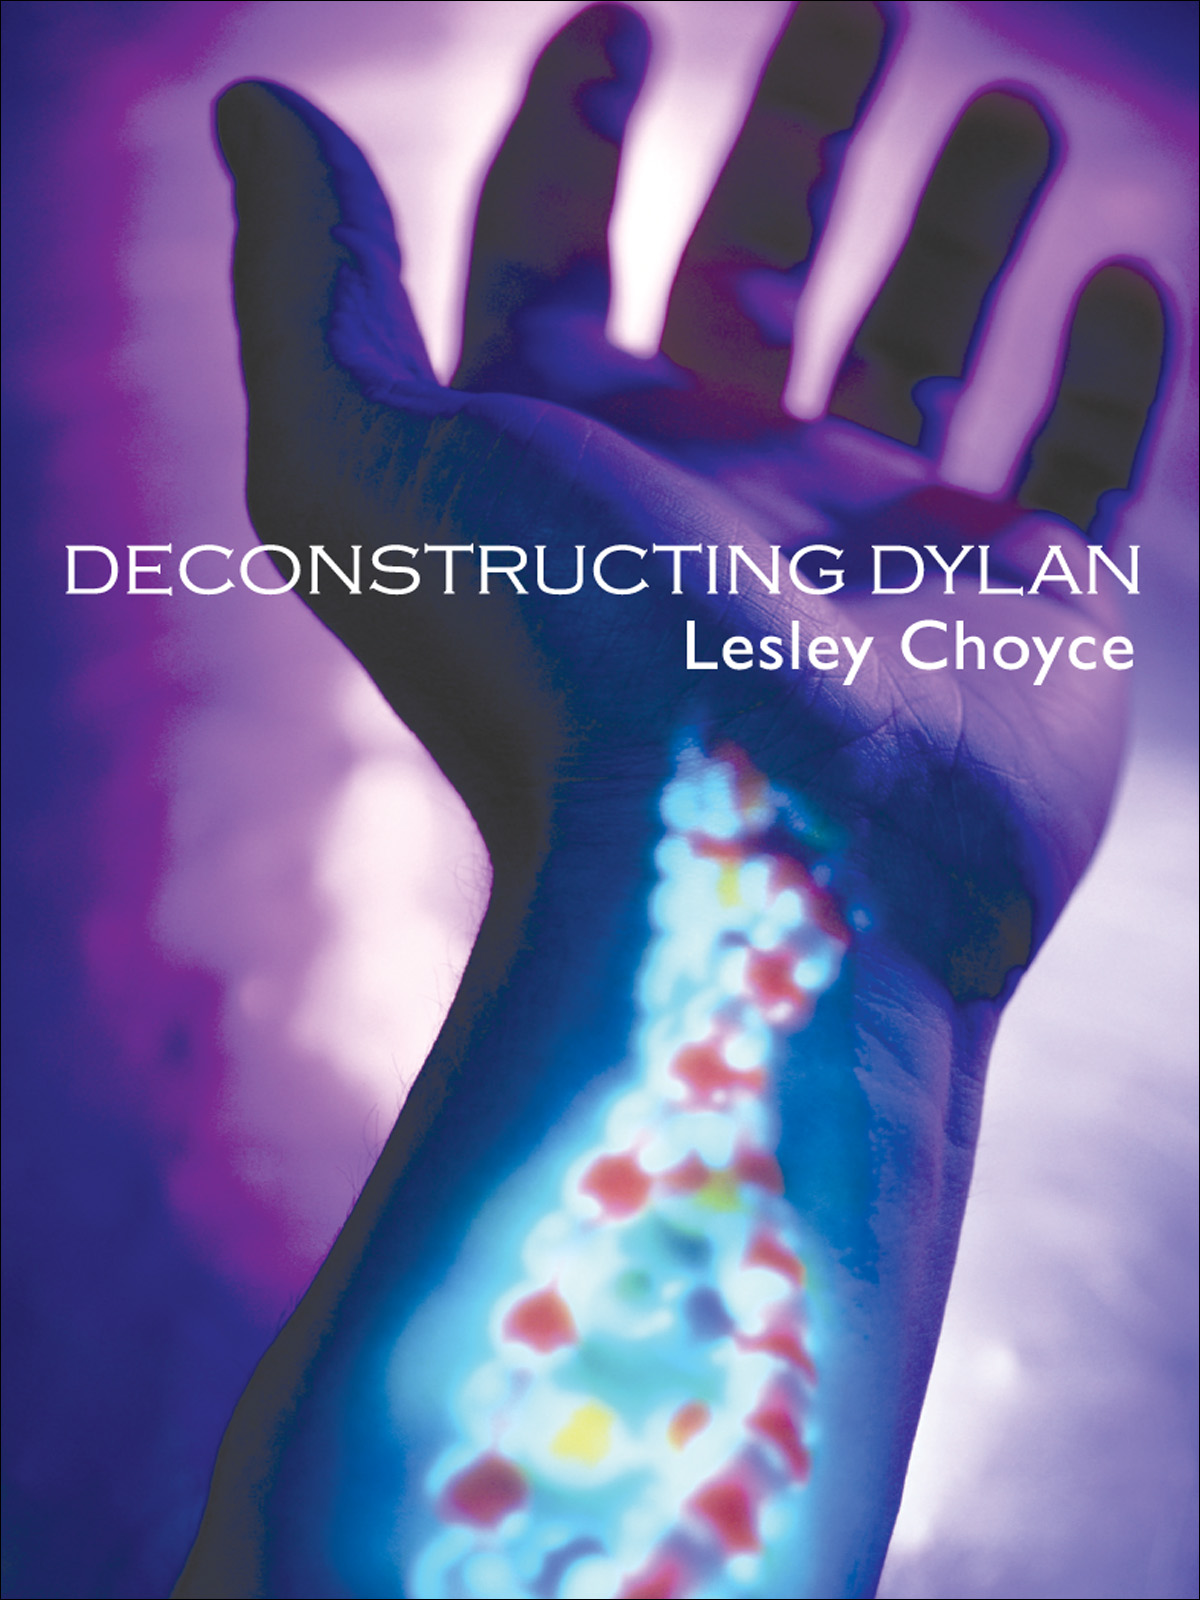 Deconstructing Dylan by Lesley Choyce